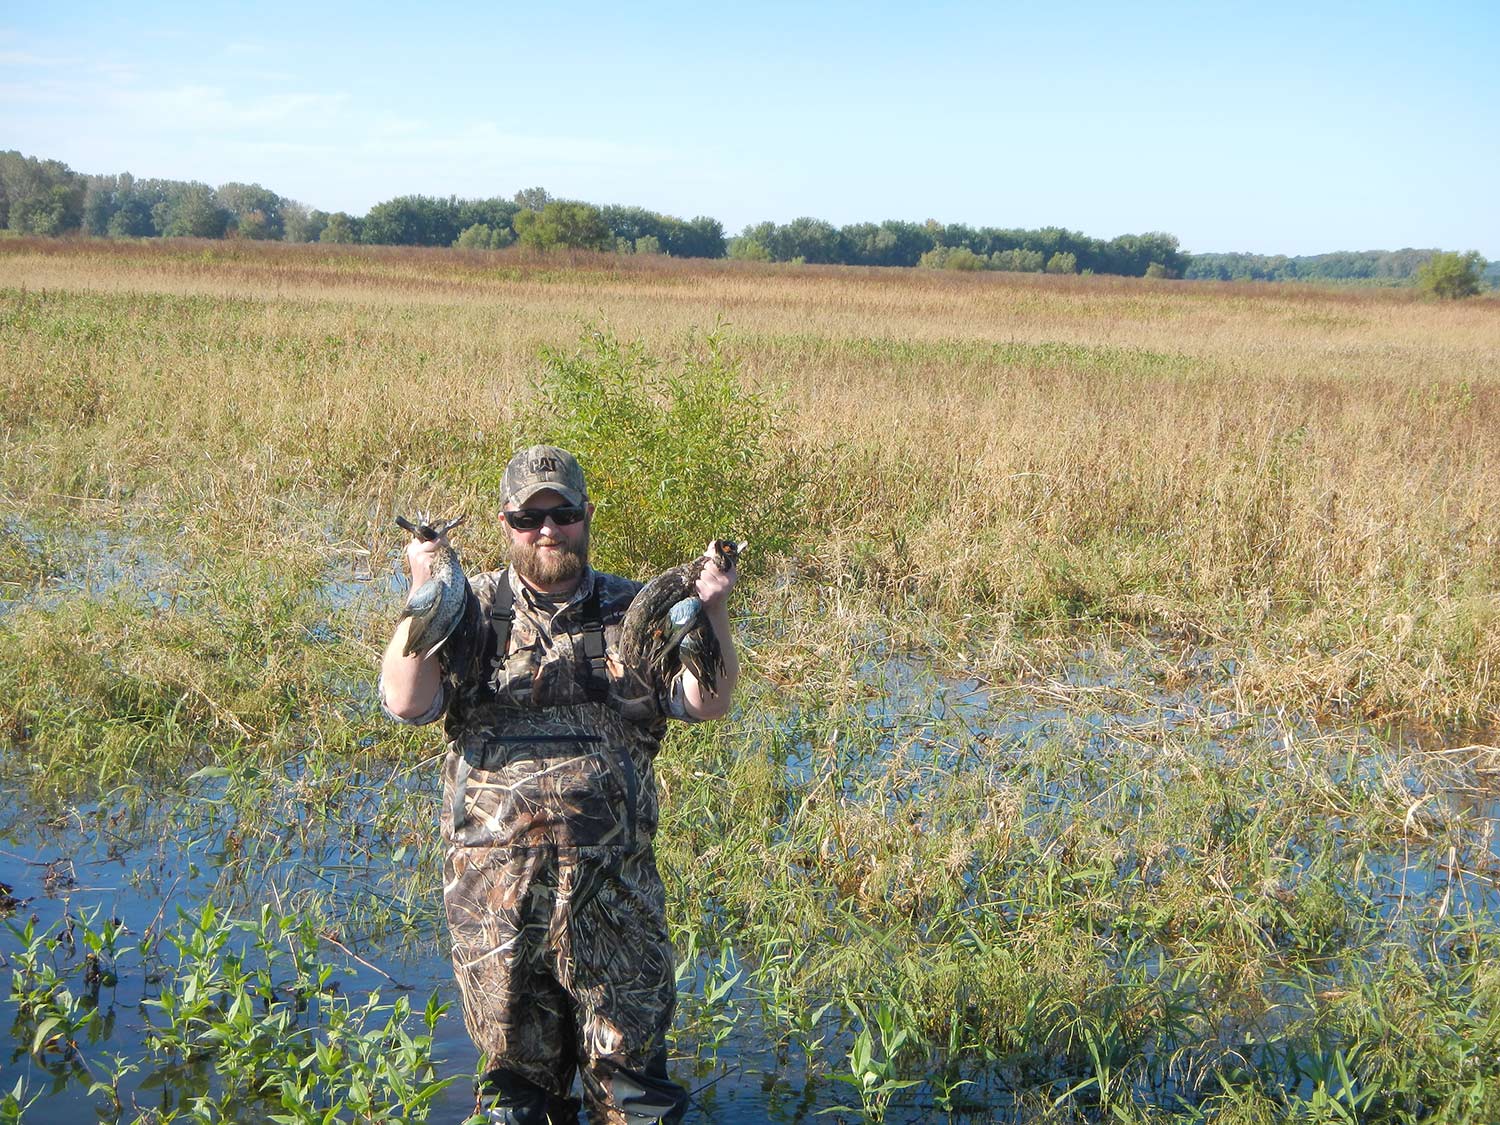 A hunter holding up ducks in a marshy swamp